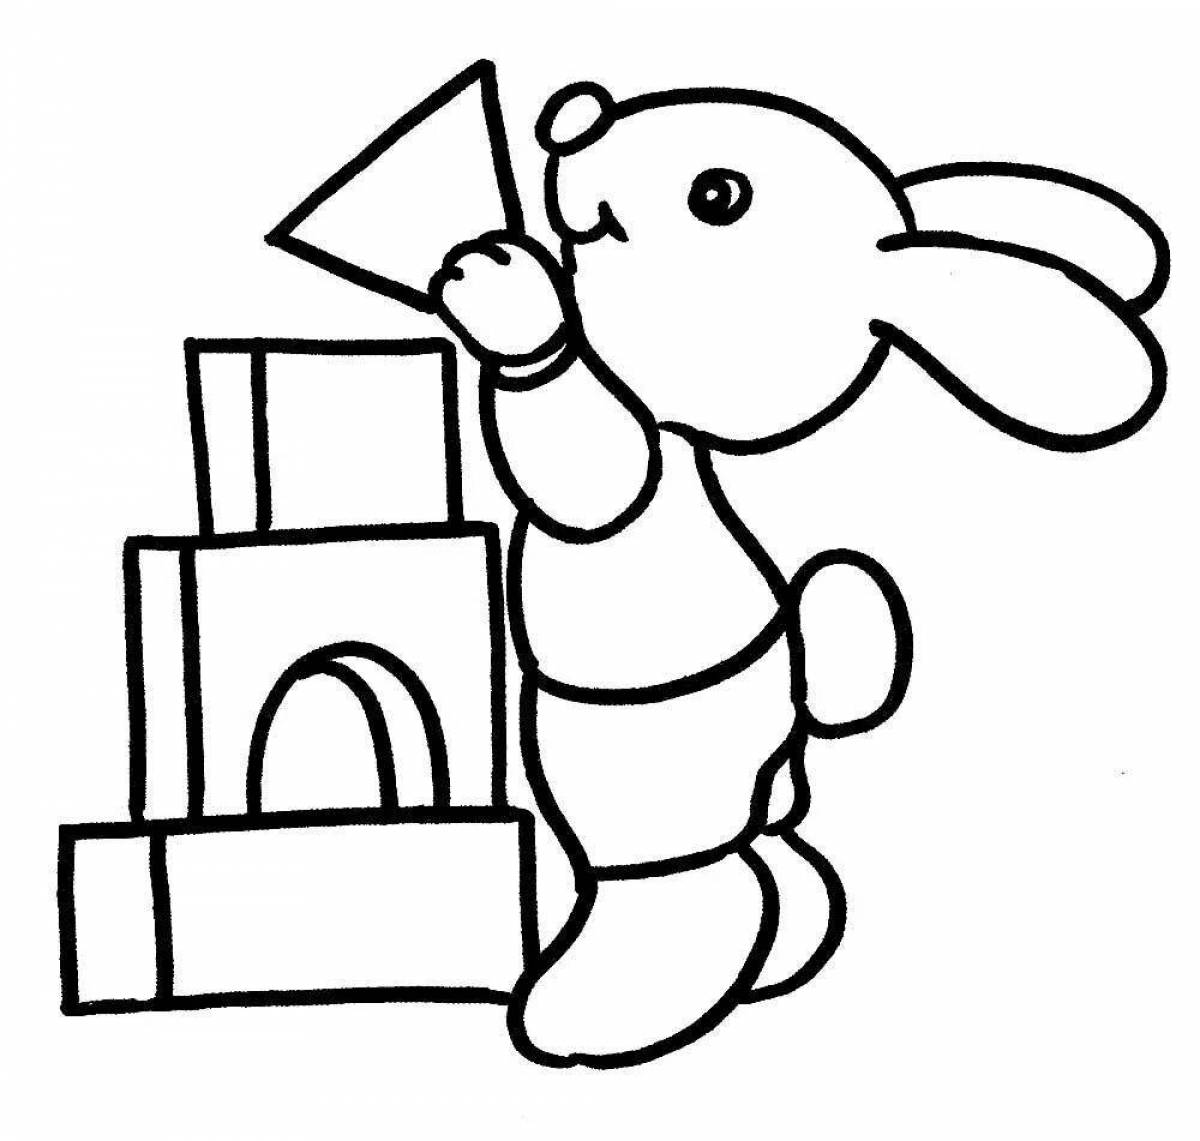 Adorable coloring book for little games